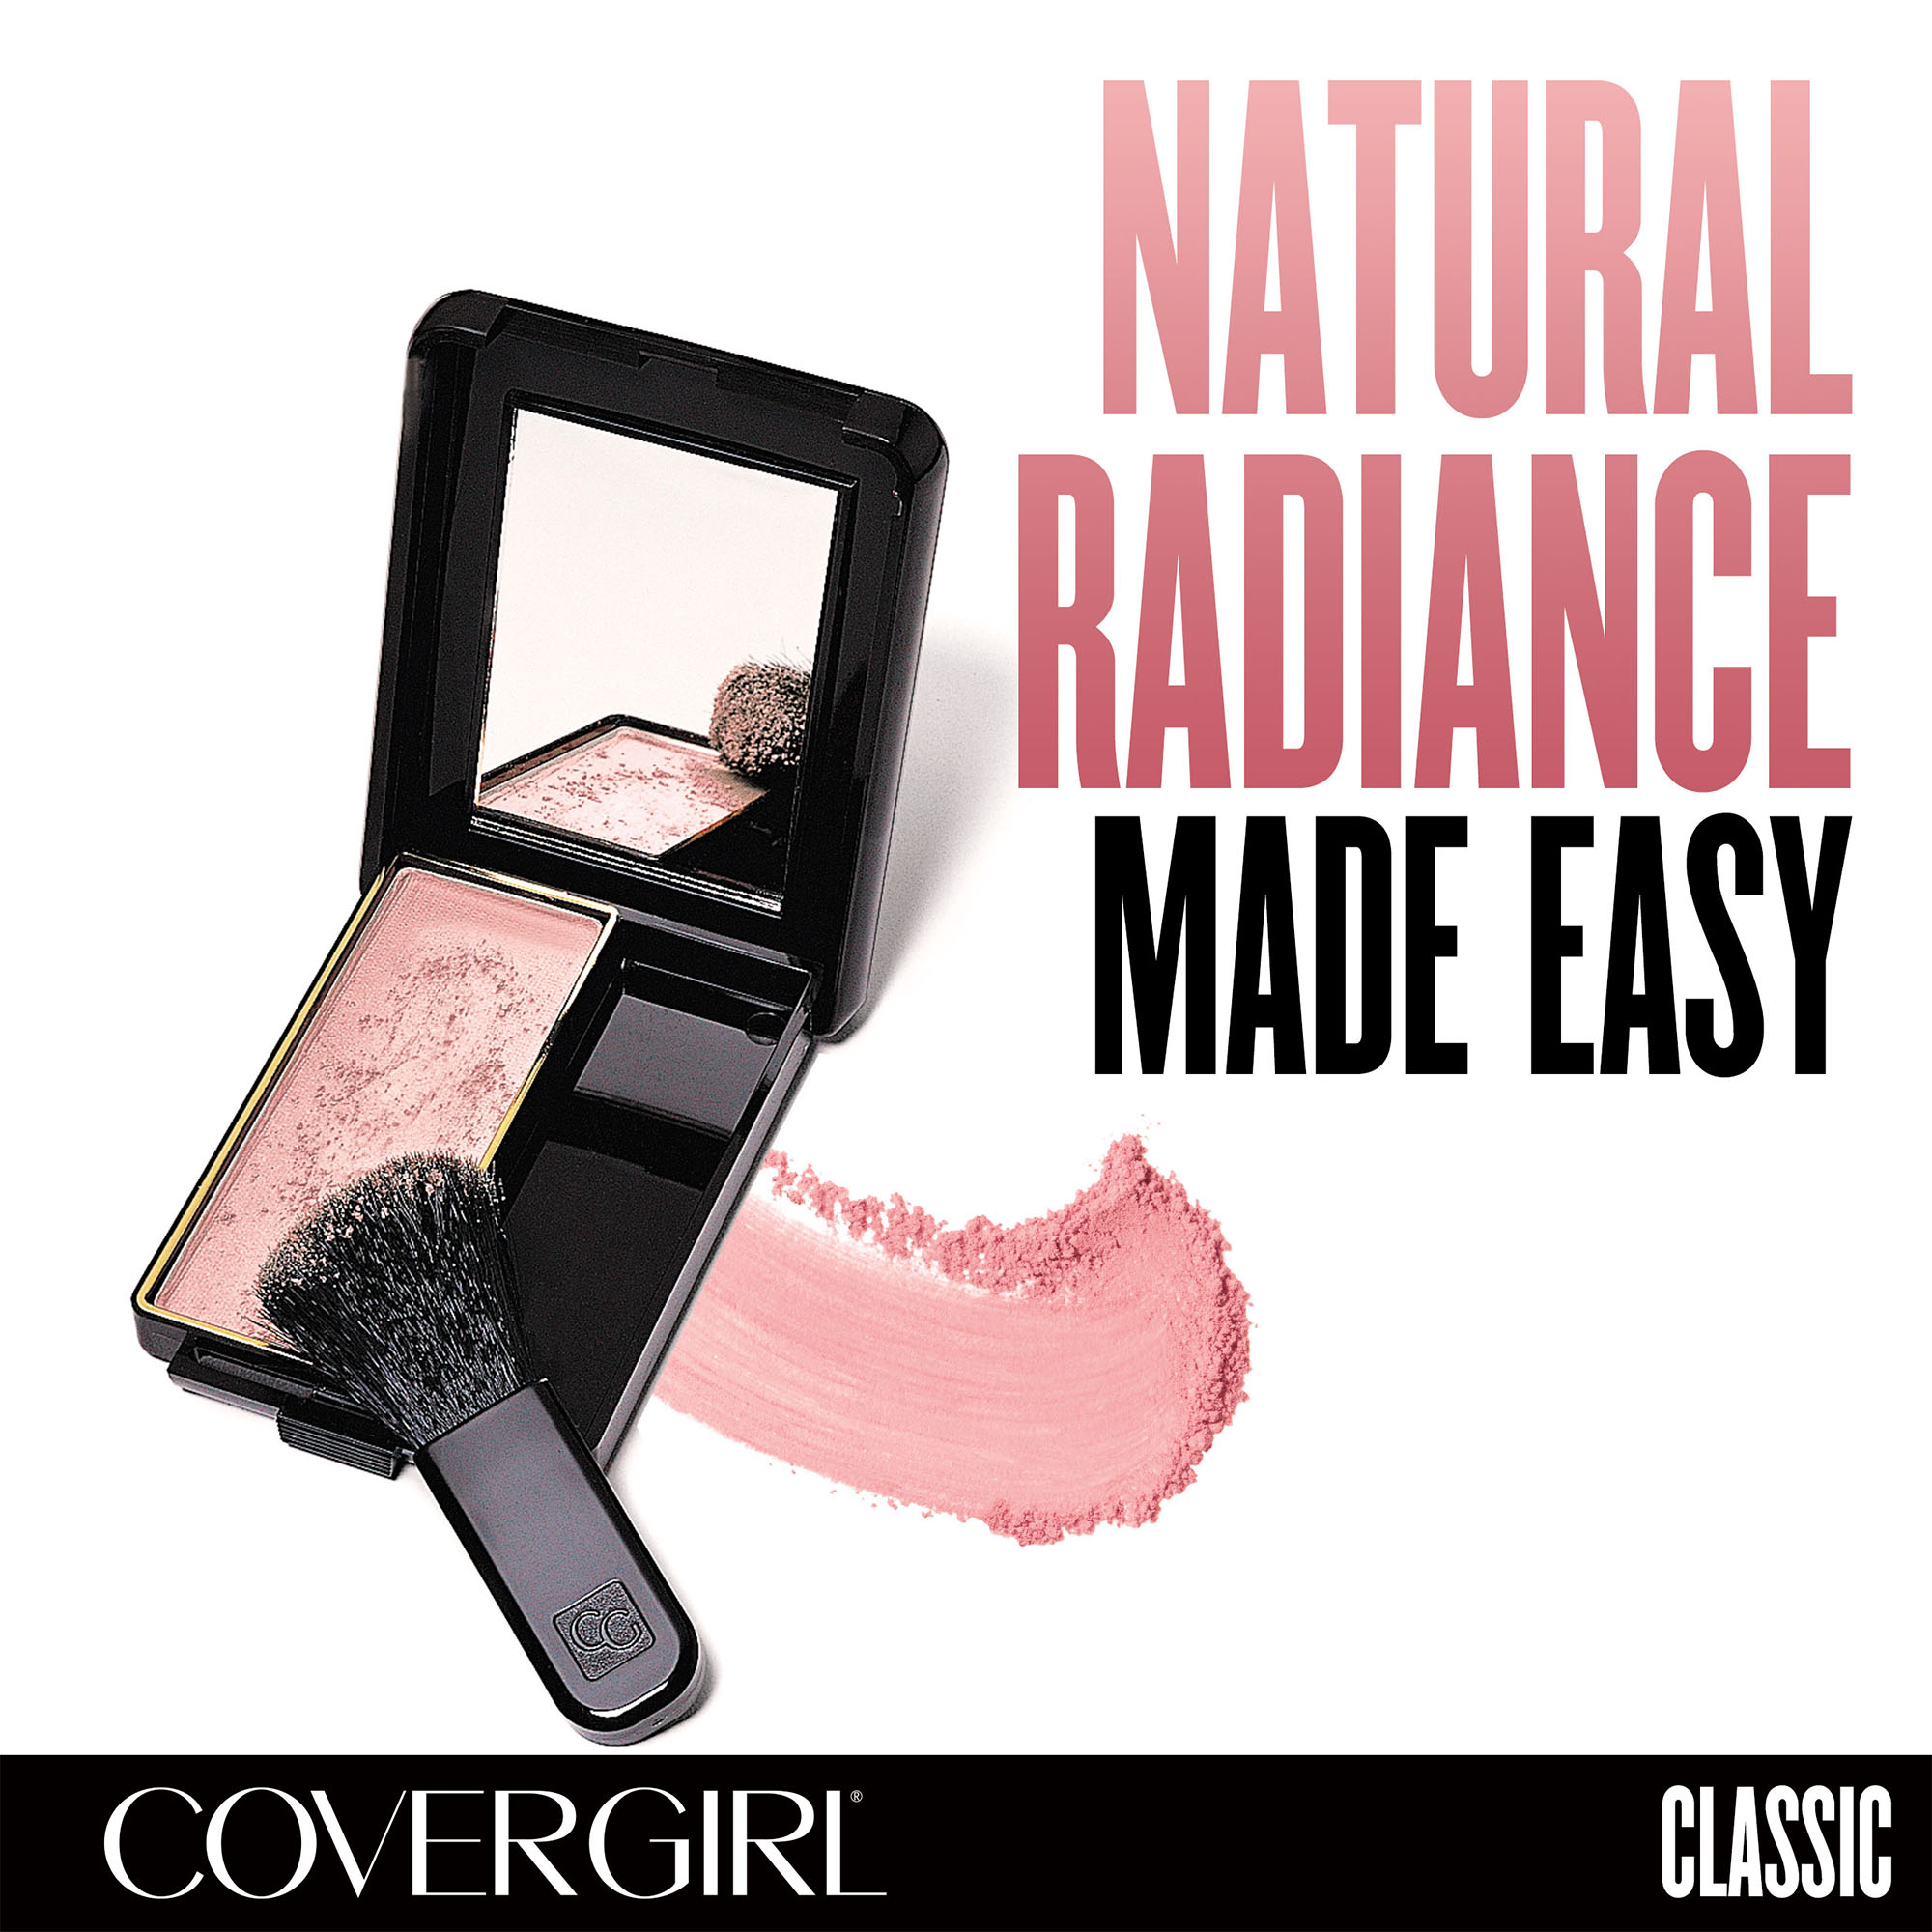 COVERGIRL Classic Color Powder Blush, 540 Rose Silk, 0.3 oz, Long Lasting Glowing Color - image 3 of 5